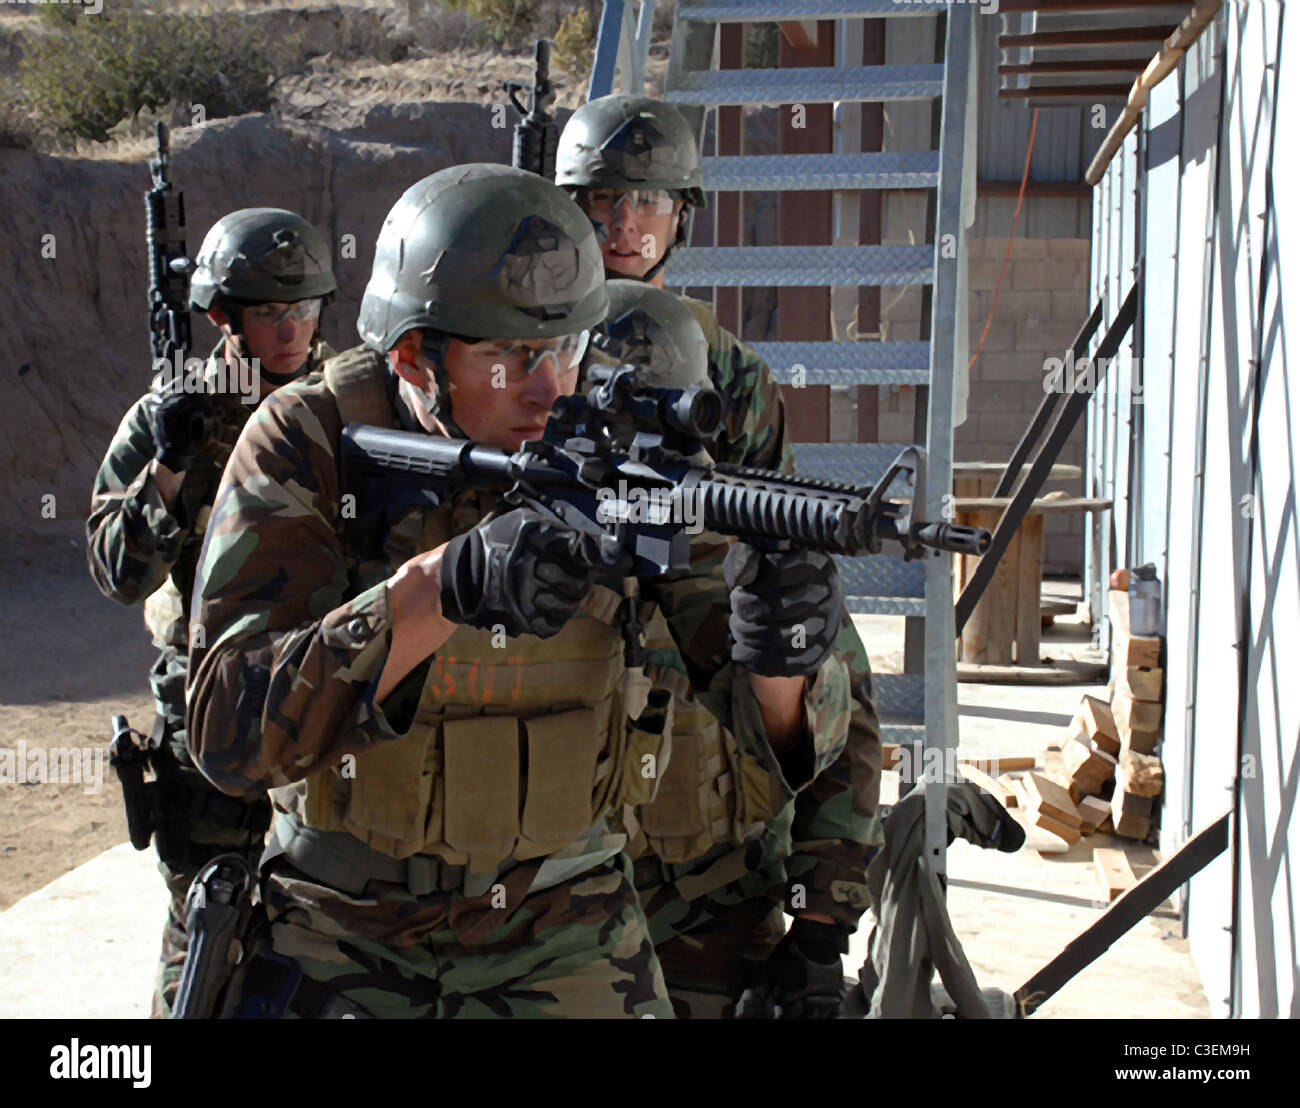 A team of four SEAL trainees prepare to breach a room during a SEAL qualification training exercise. Stock Photo